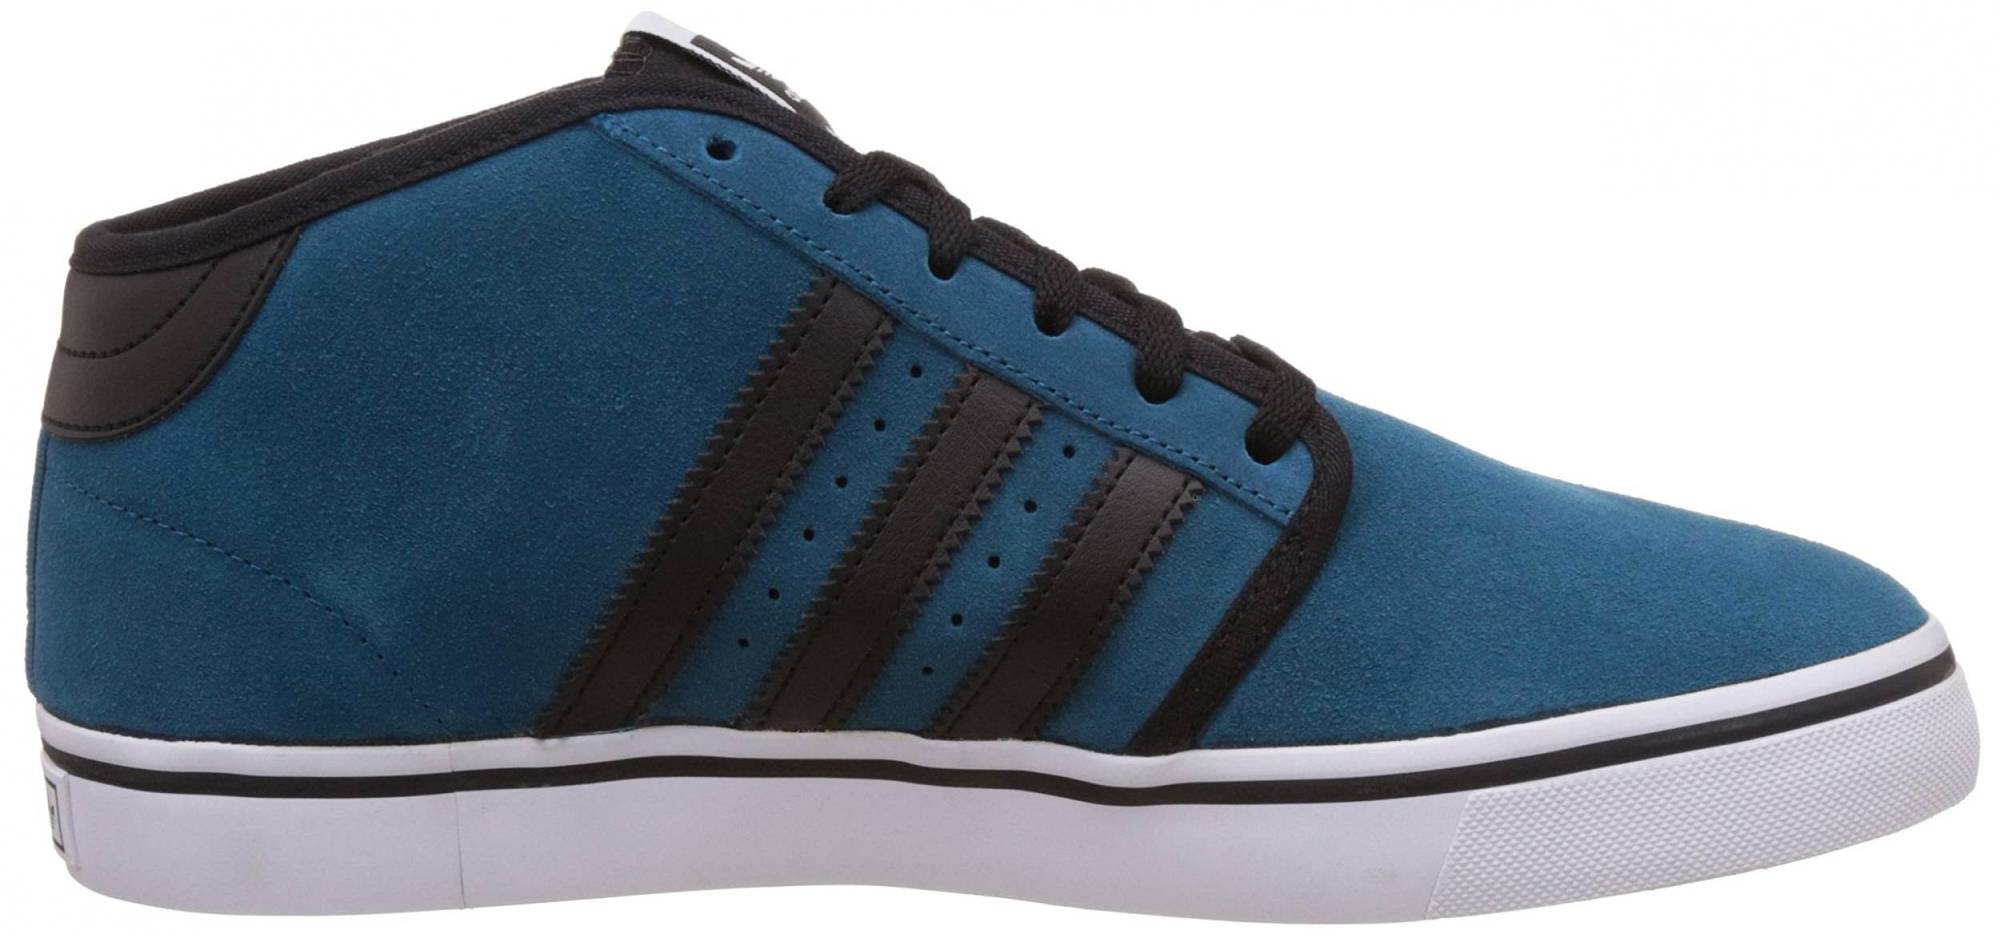 Adidas Seeley Mid Shoes Reviews & Reasons To Buy